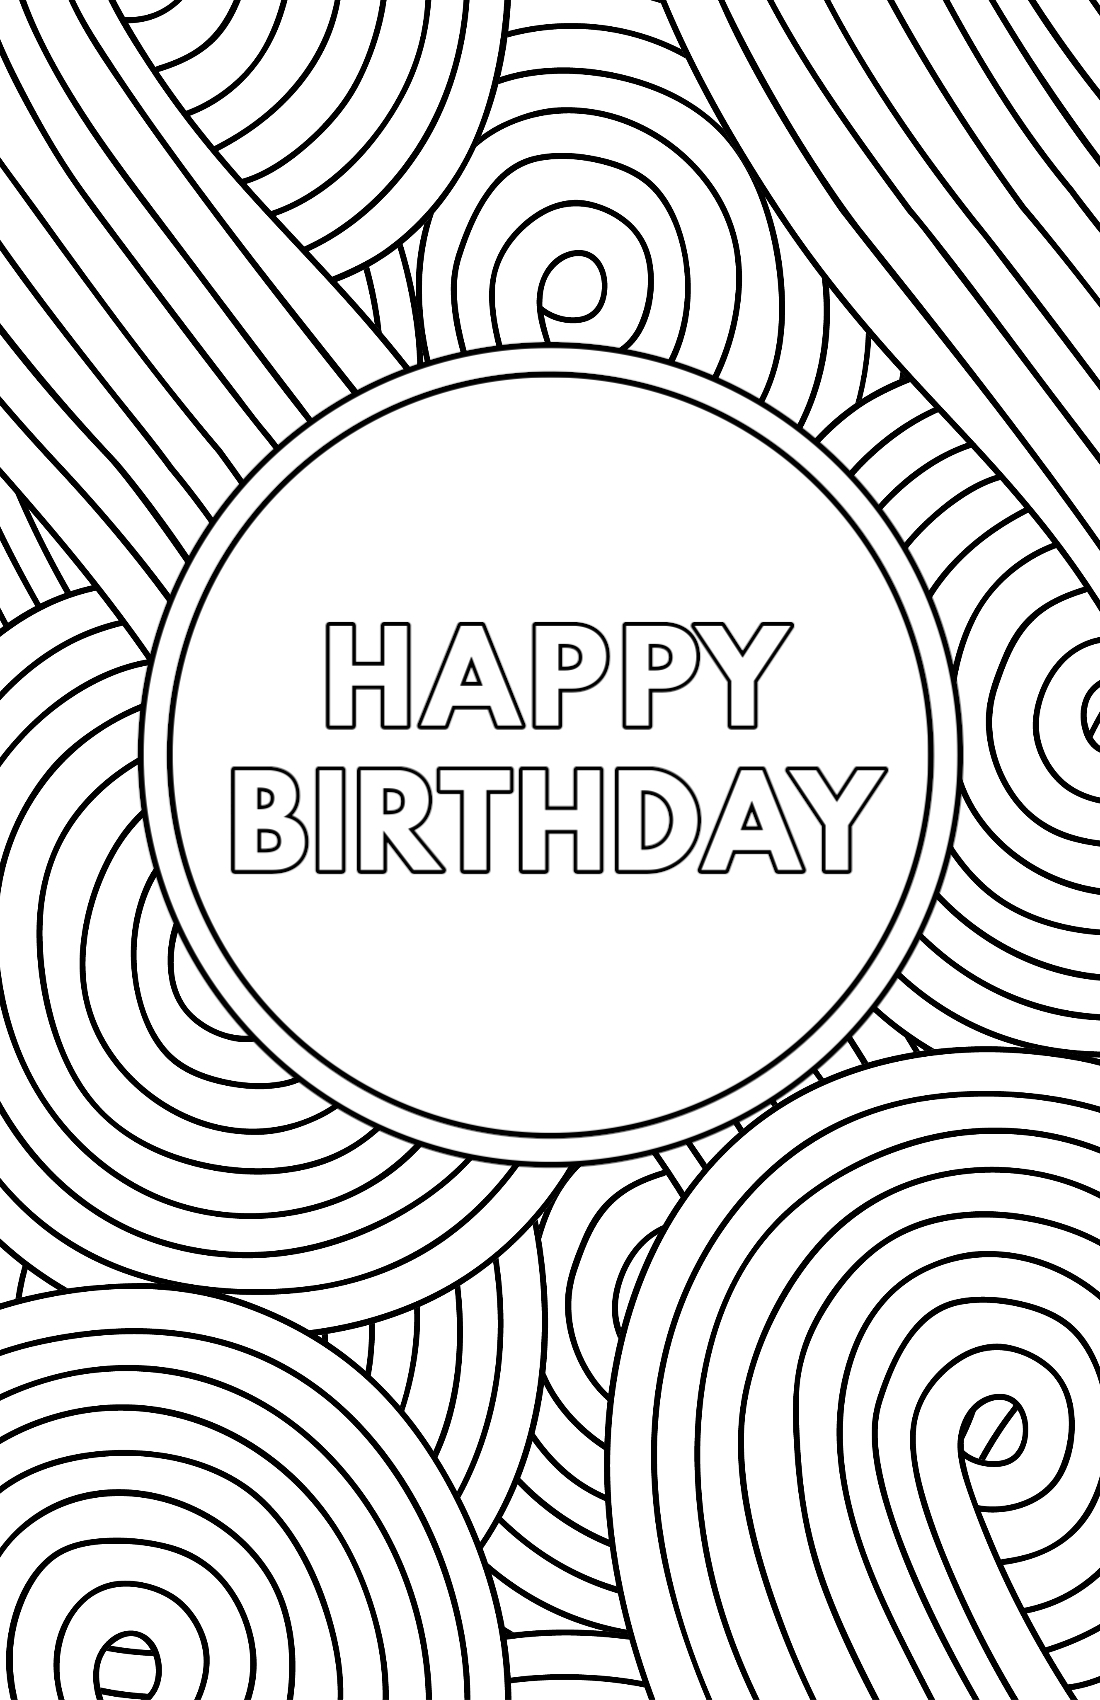 birthday-card-templates-for-pages-implora